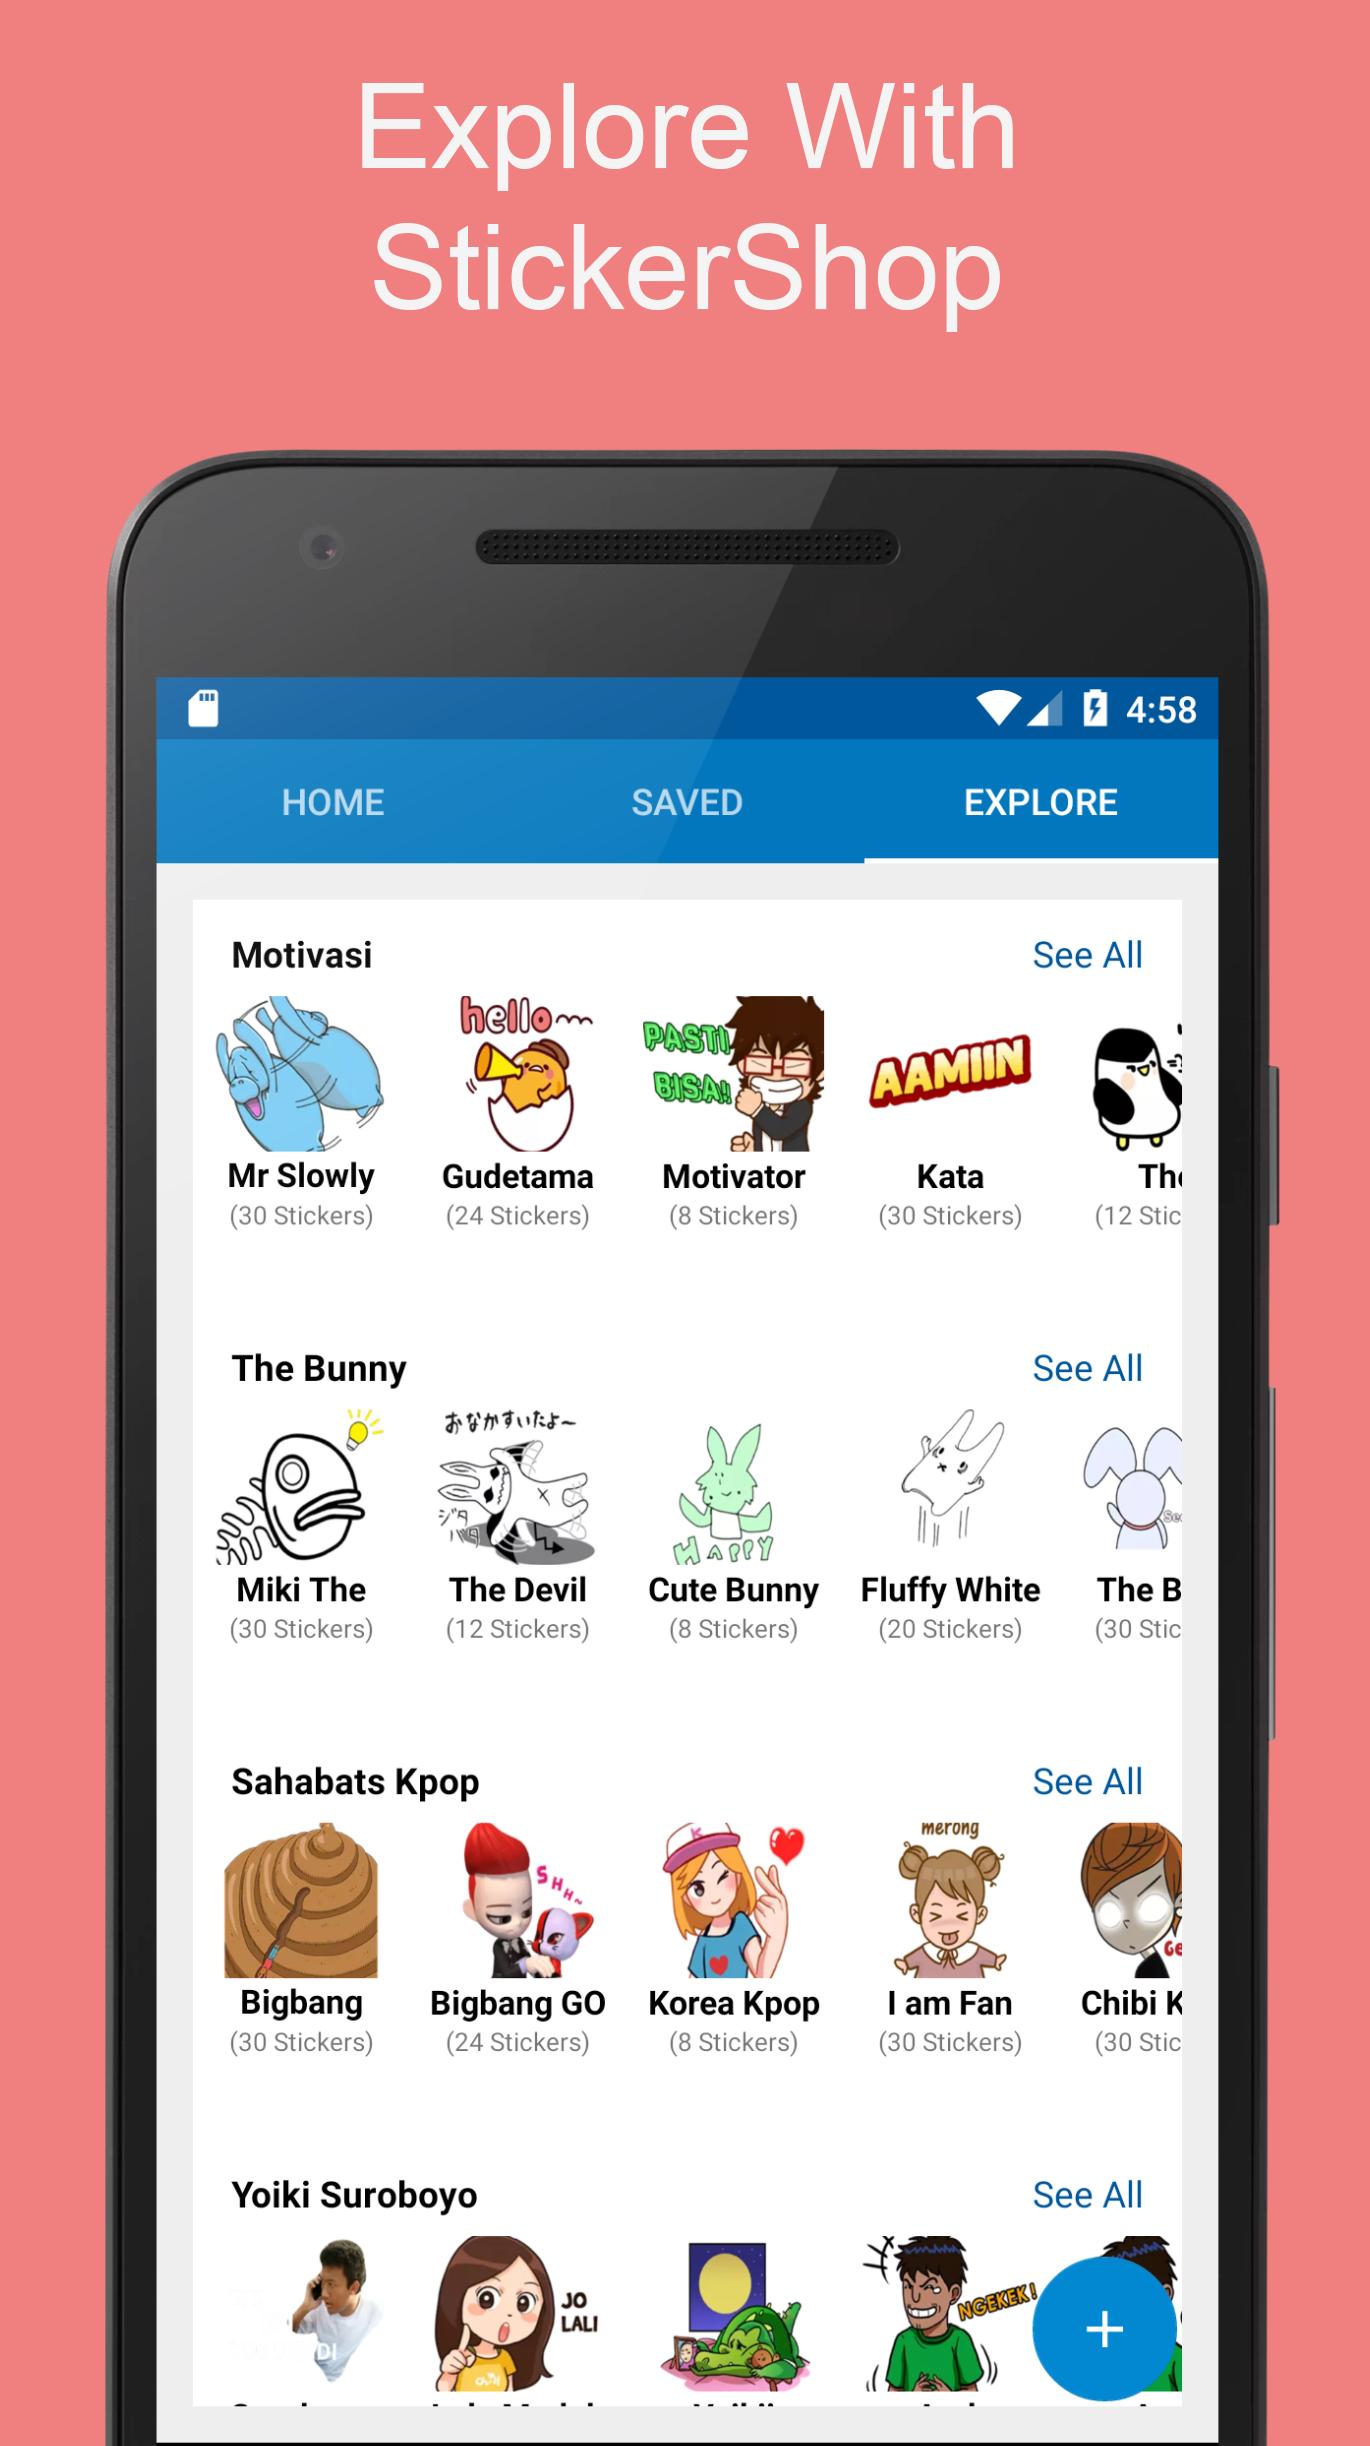 Stiker Wa Cute Lucu Gemesin Manis Wastickerapps For Android